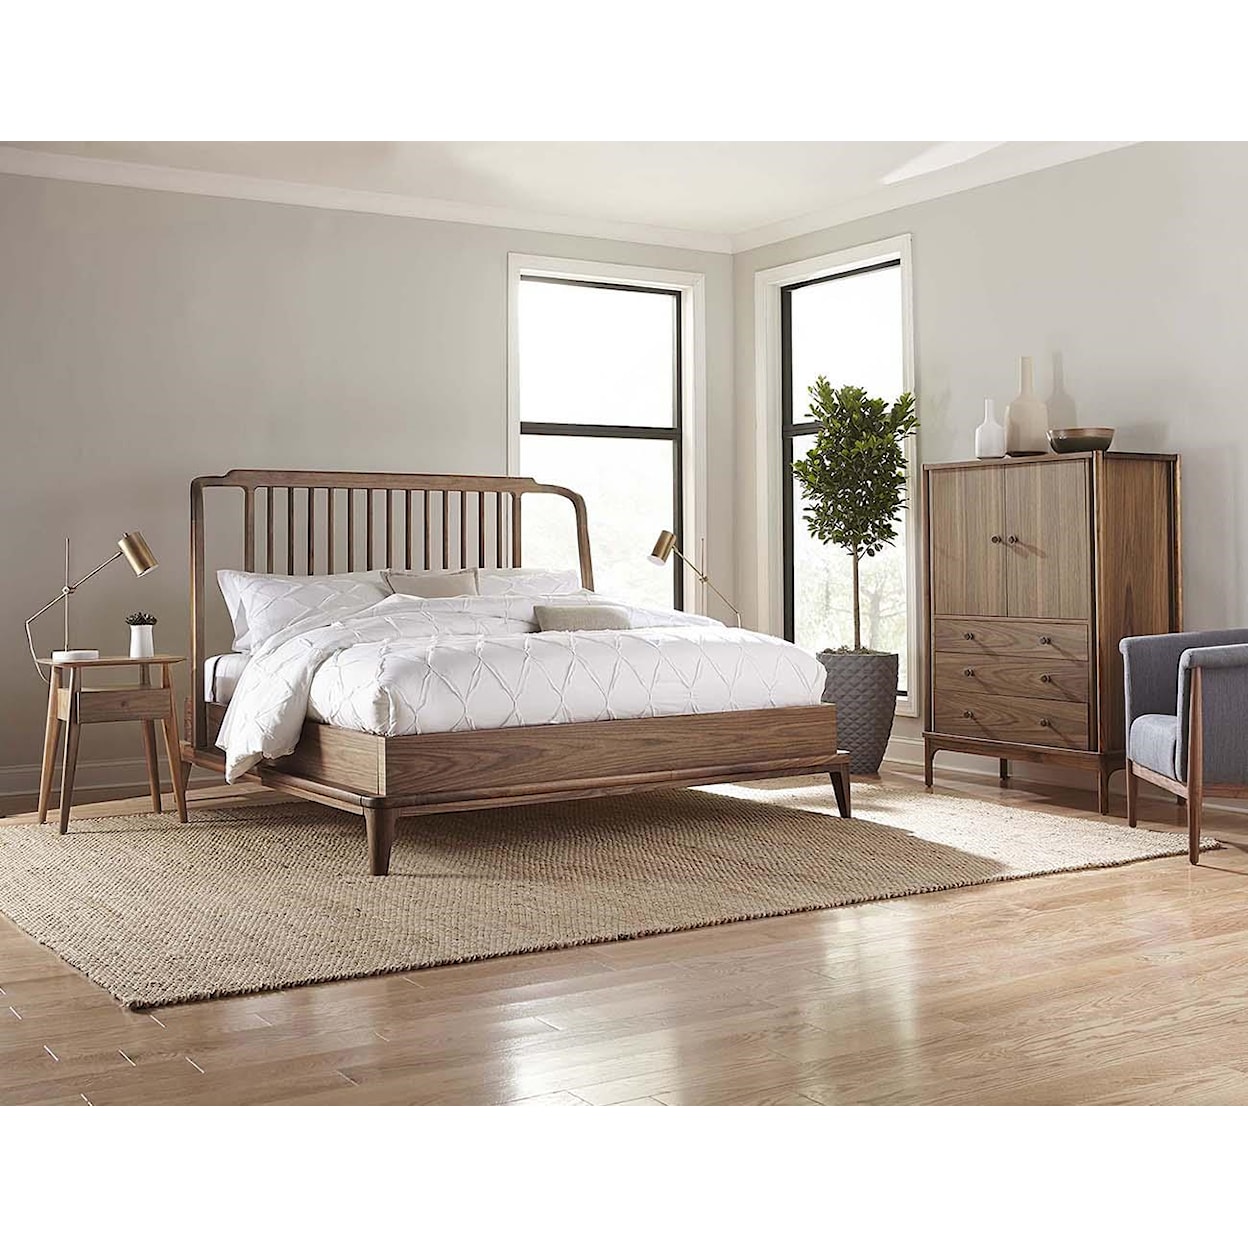 Stickley Walnut Grove King Spindle Bed